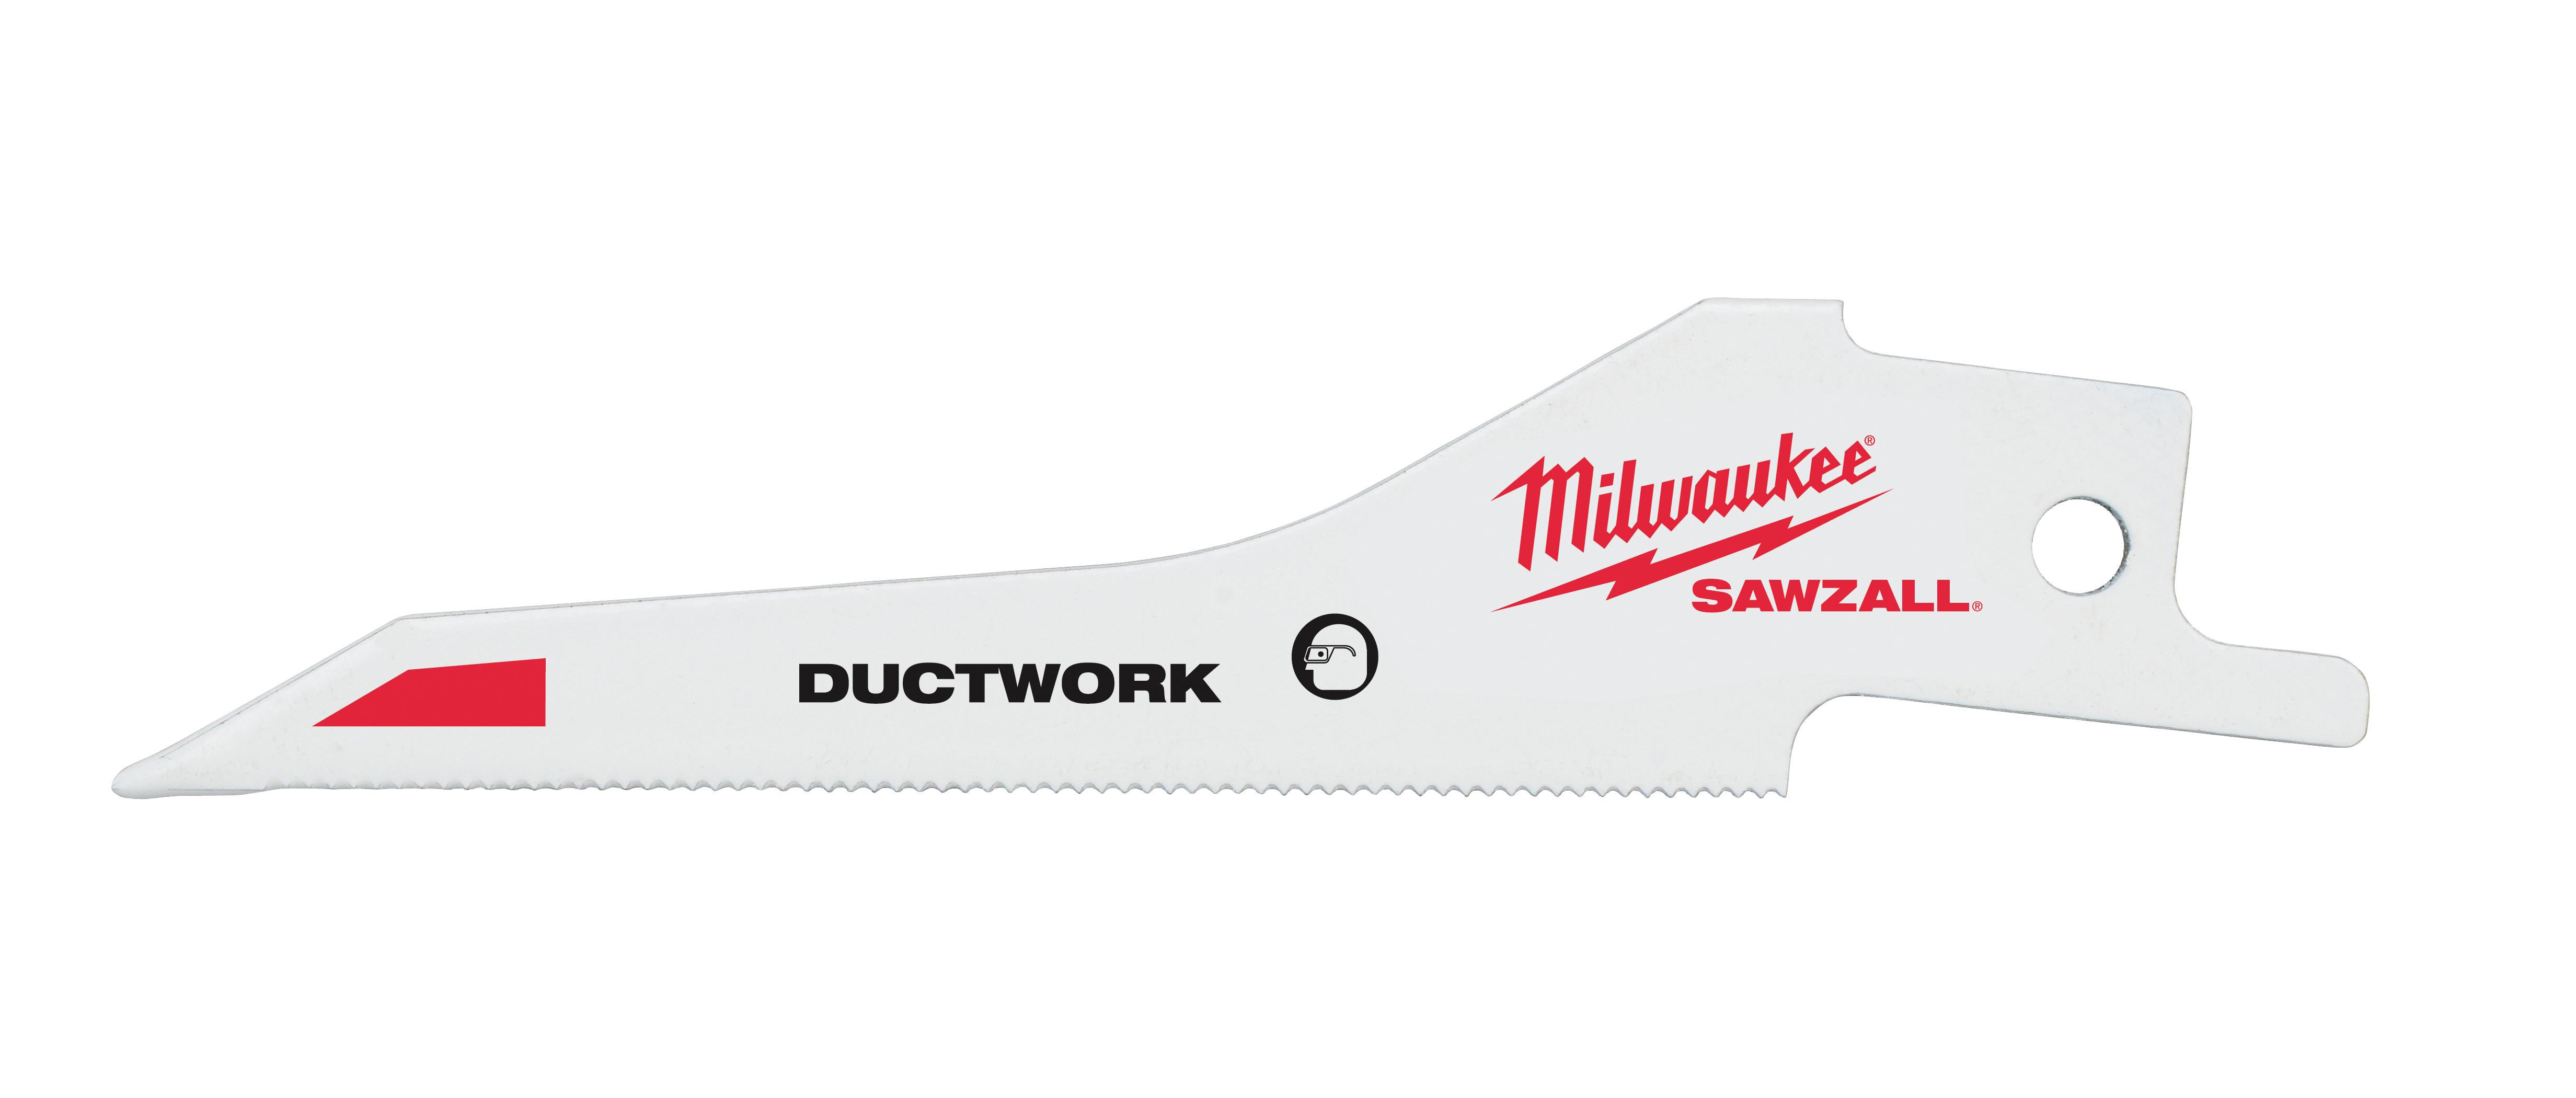 Ductwork SAWZALL Blade - 5 Pack